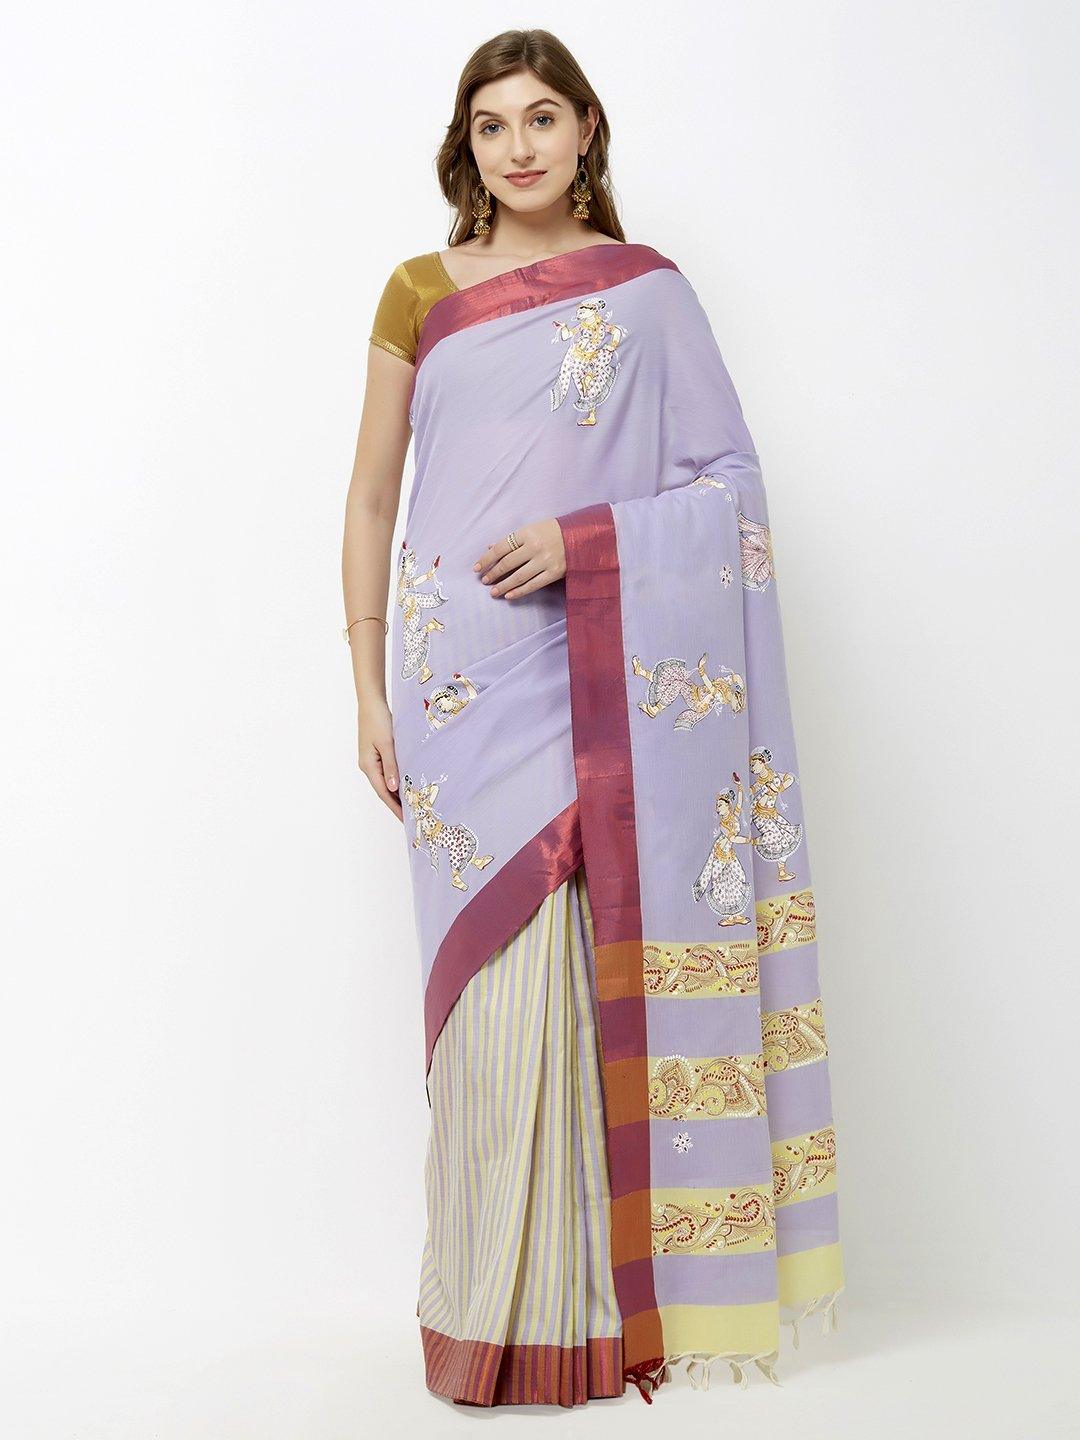 CraftsCollection.in - Grey Cotton Saree with handpainted Pattachitra motifs